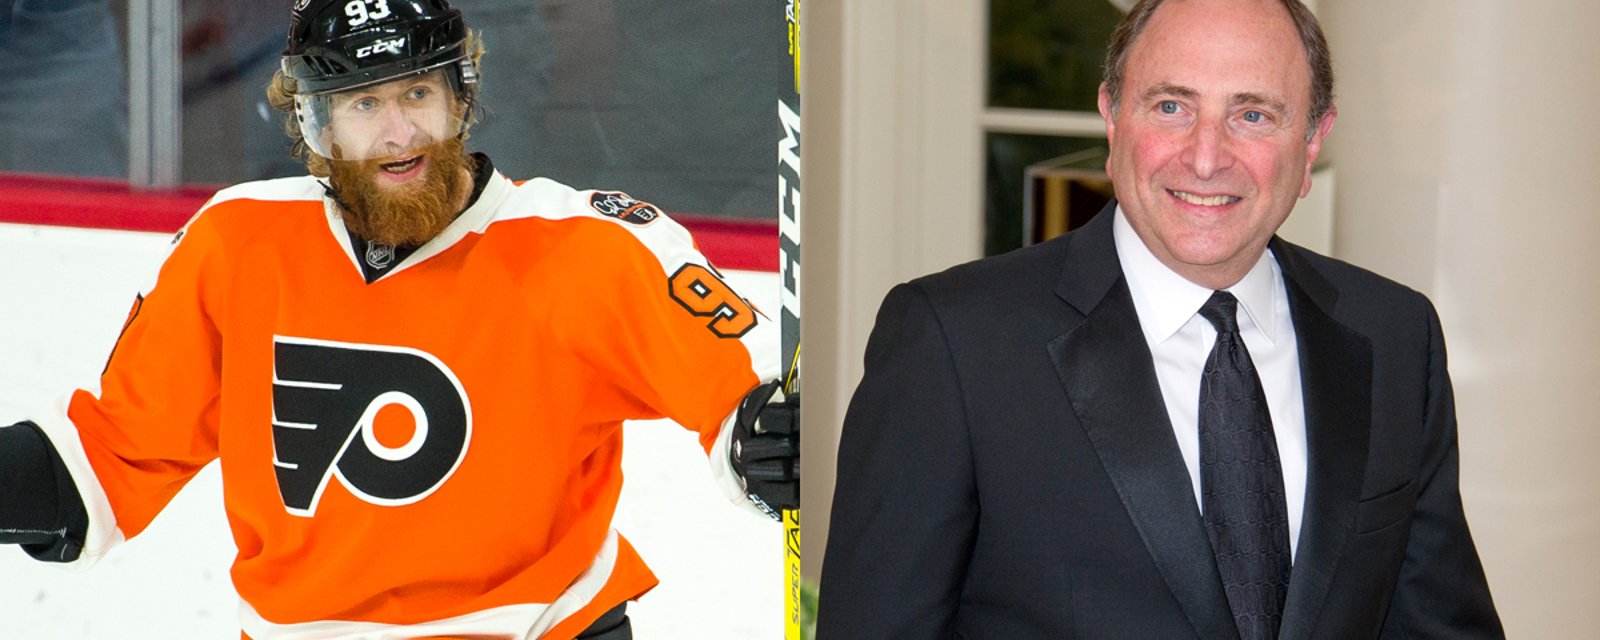 Jakub Voracek stands up and lashes out at Bill Dally and Gary Bettman on the Olympics.